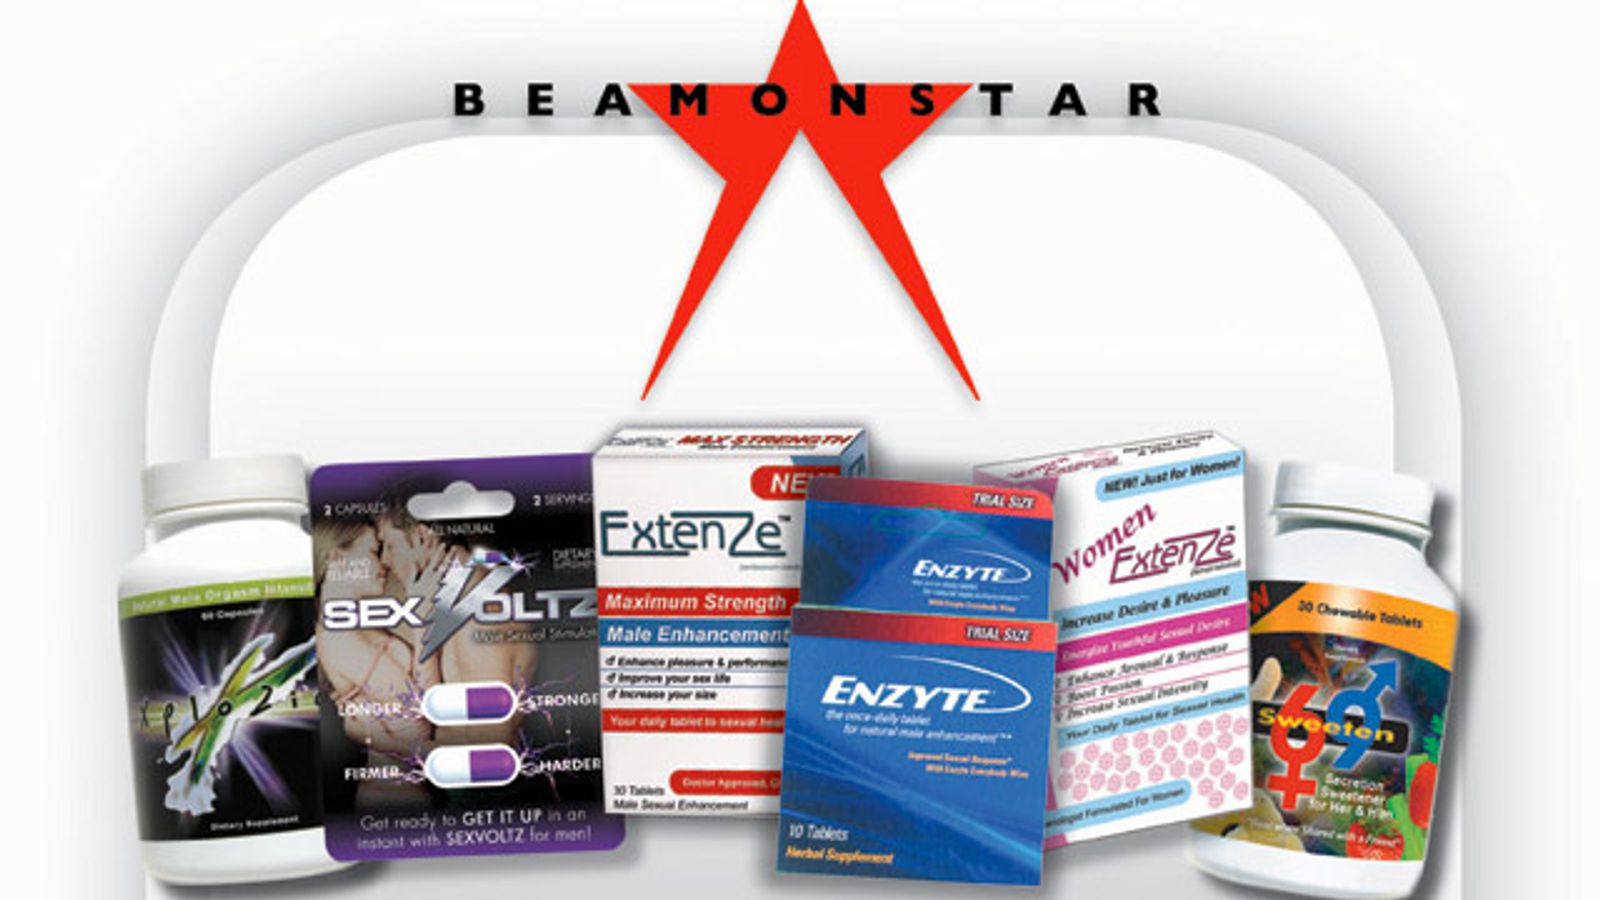 BeaMonstar Shifts Focus From ExtenZe to Offer Greater Variety